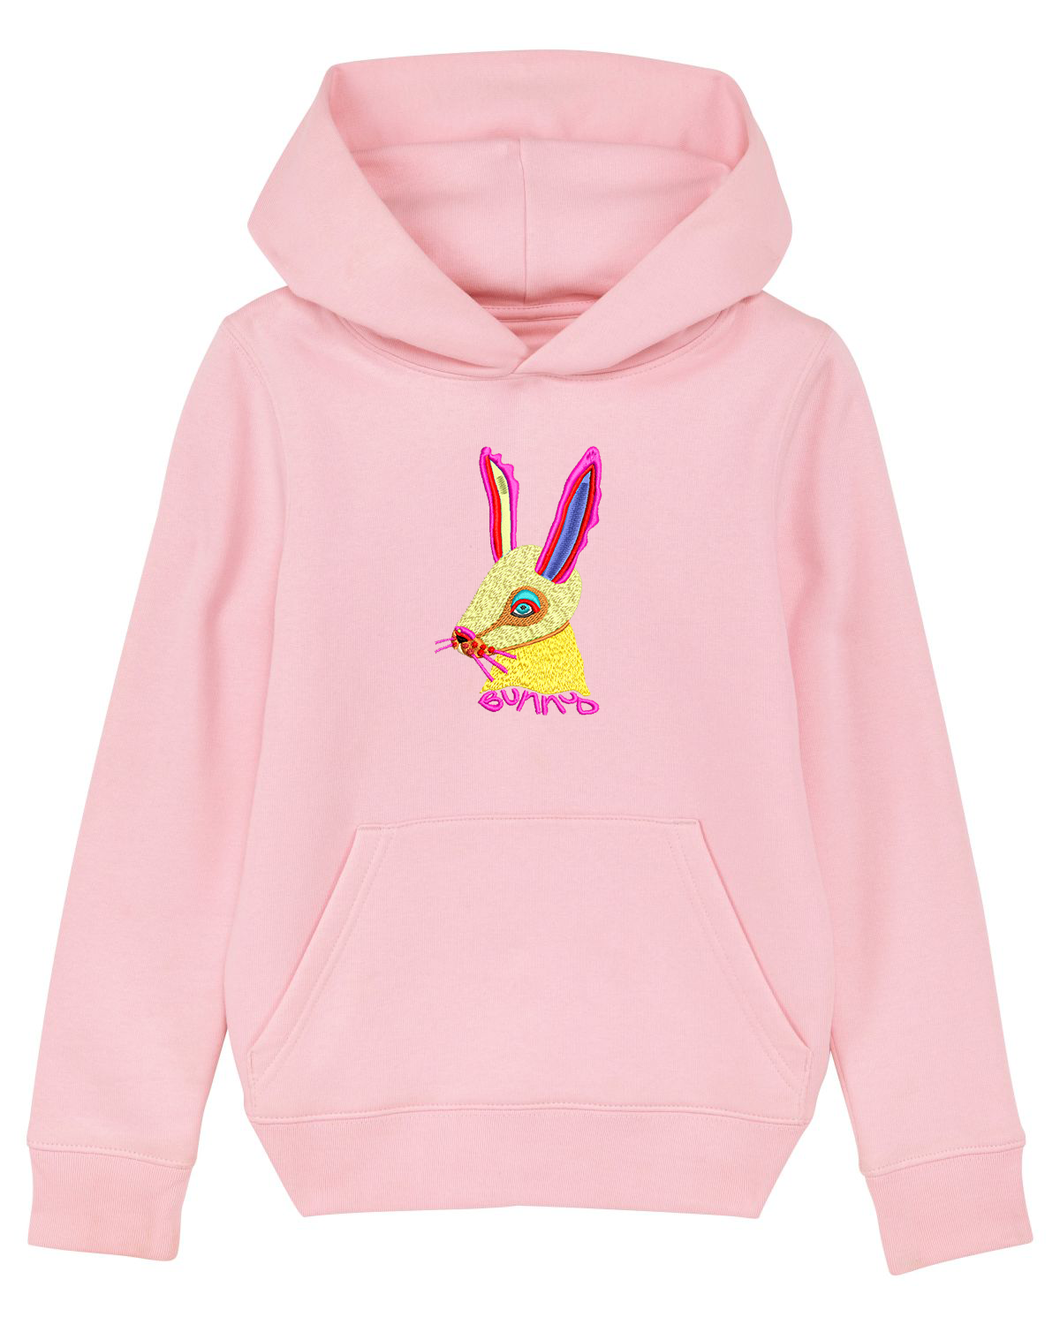 BUNNY 🐰 - Embroidered UNISEX KIDS hoodie